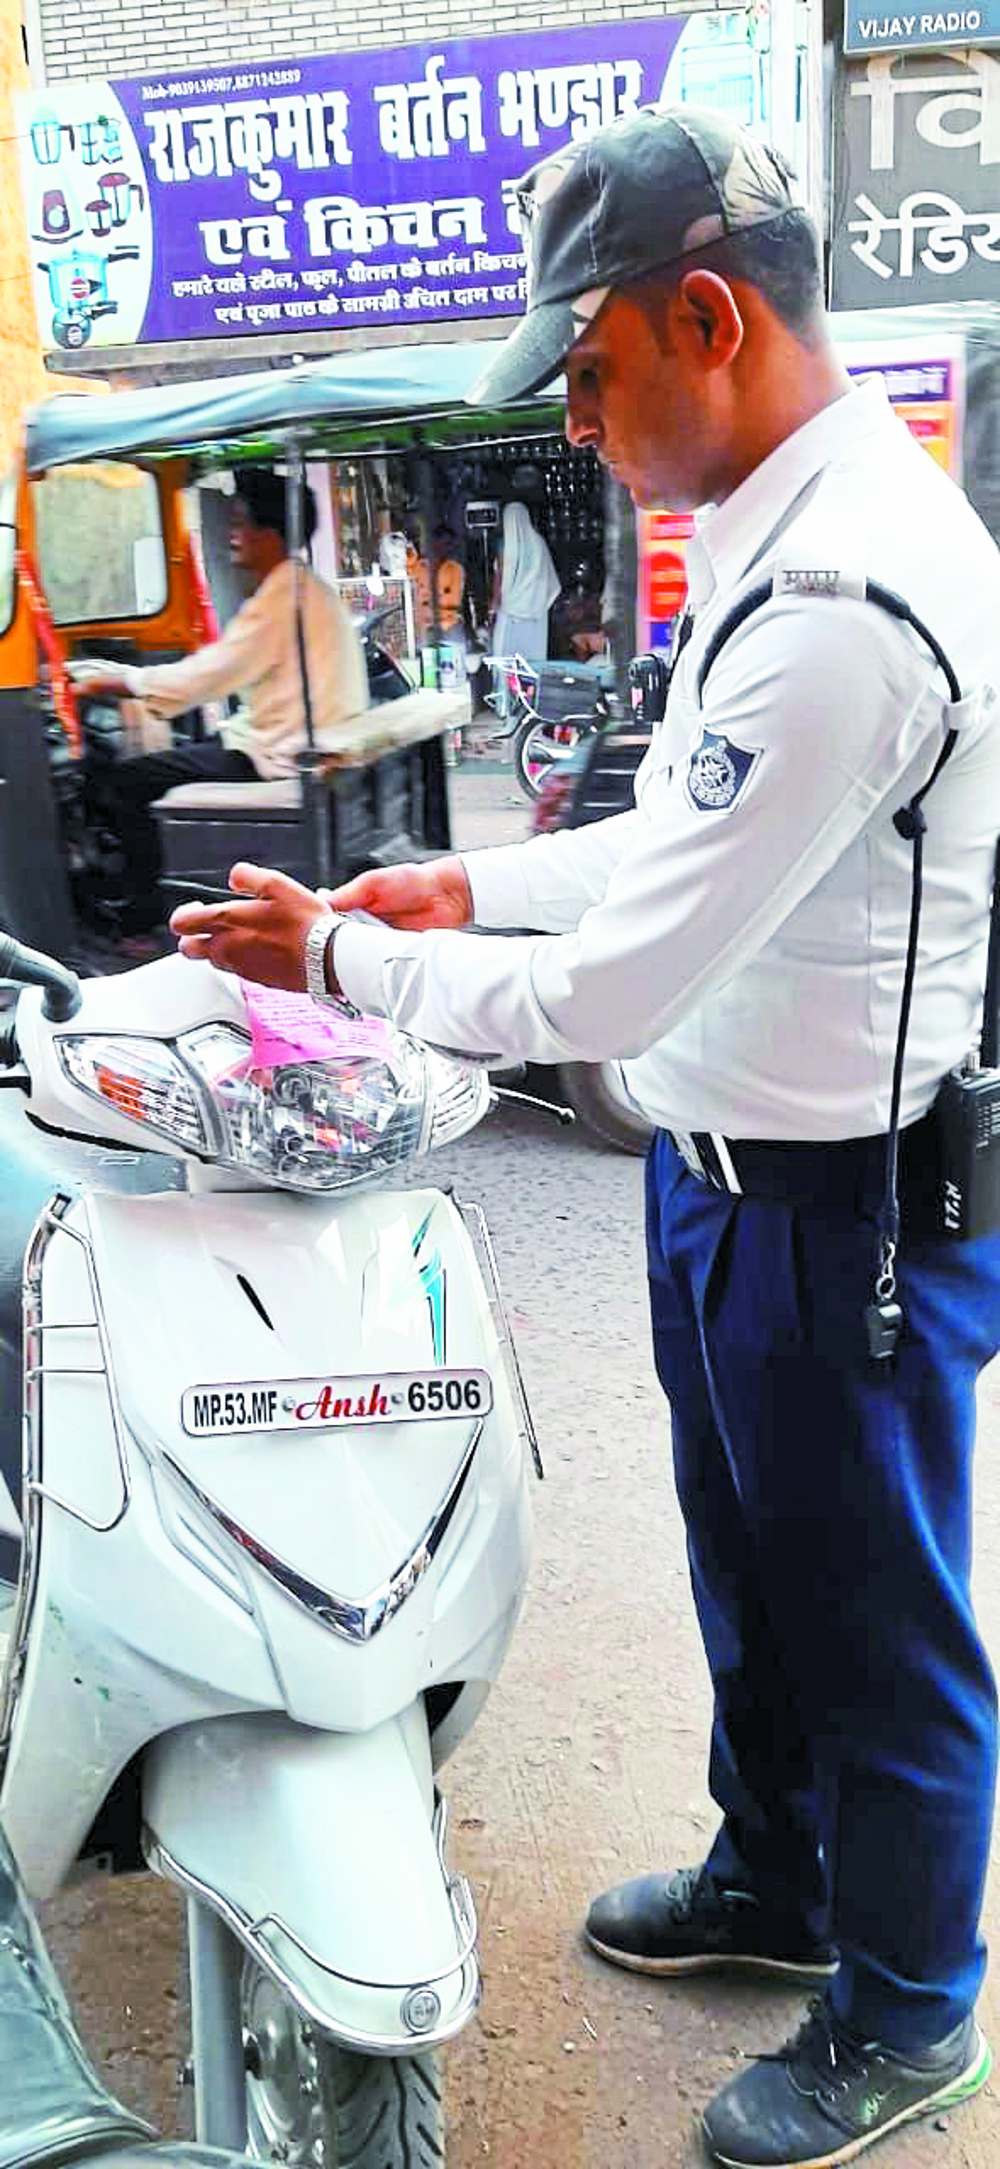 Traffic police action